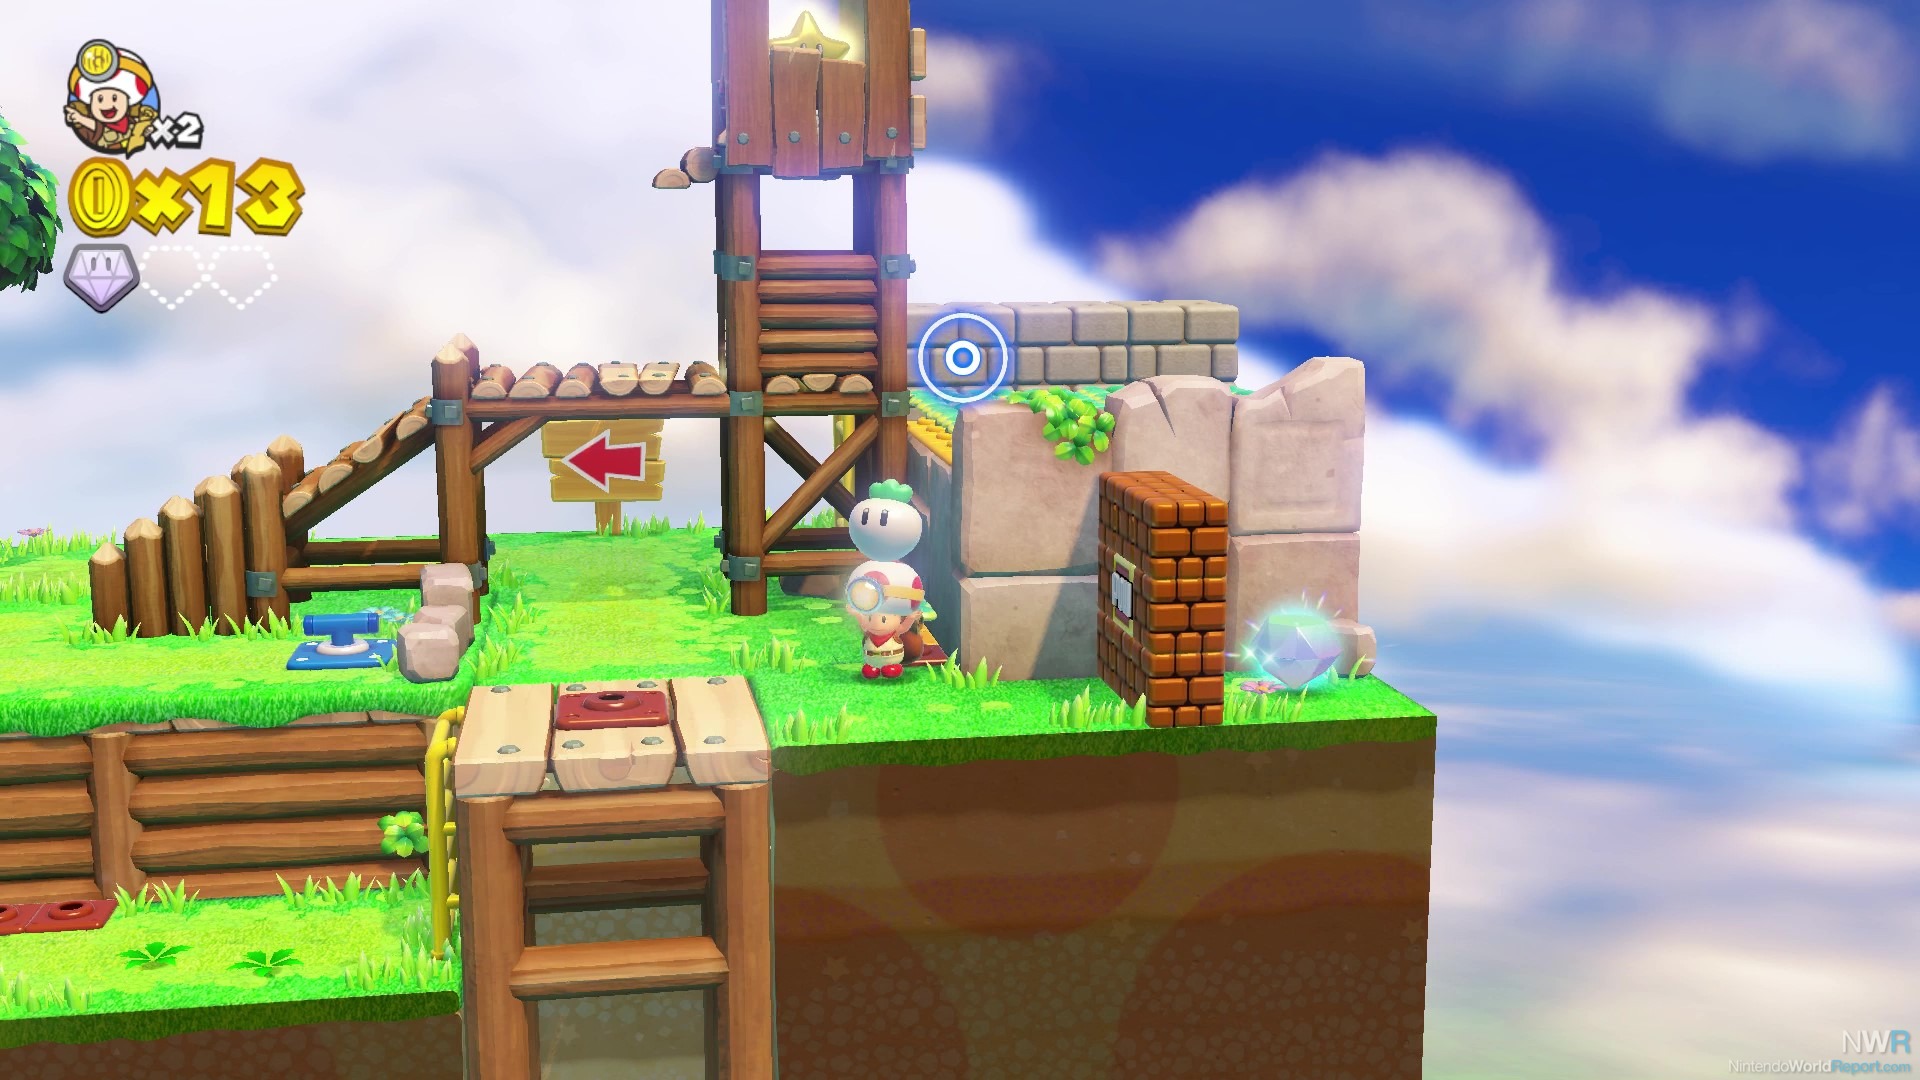 Captain Toad: Treasure Tracker Review - Review - Nintendo World Report